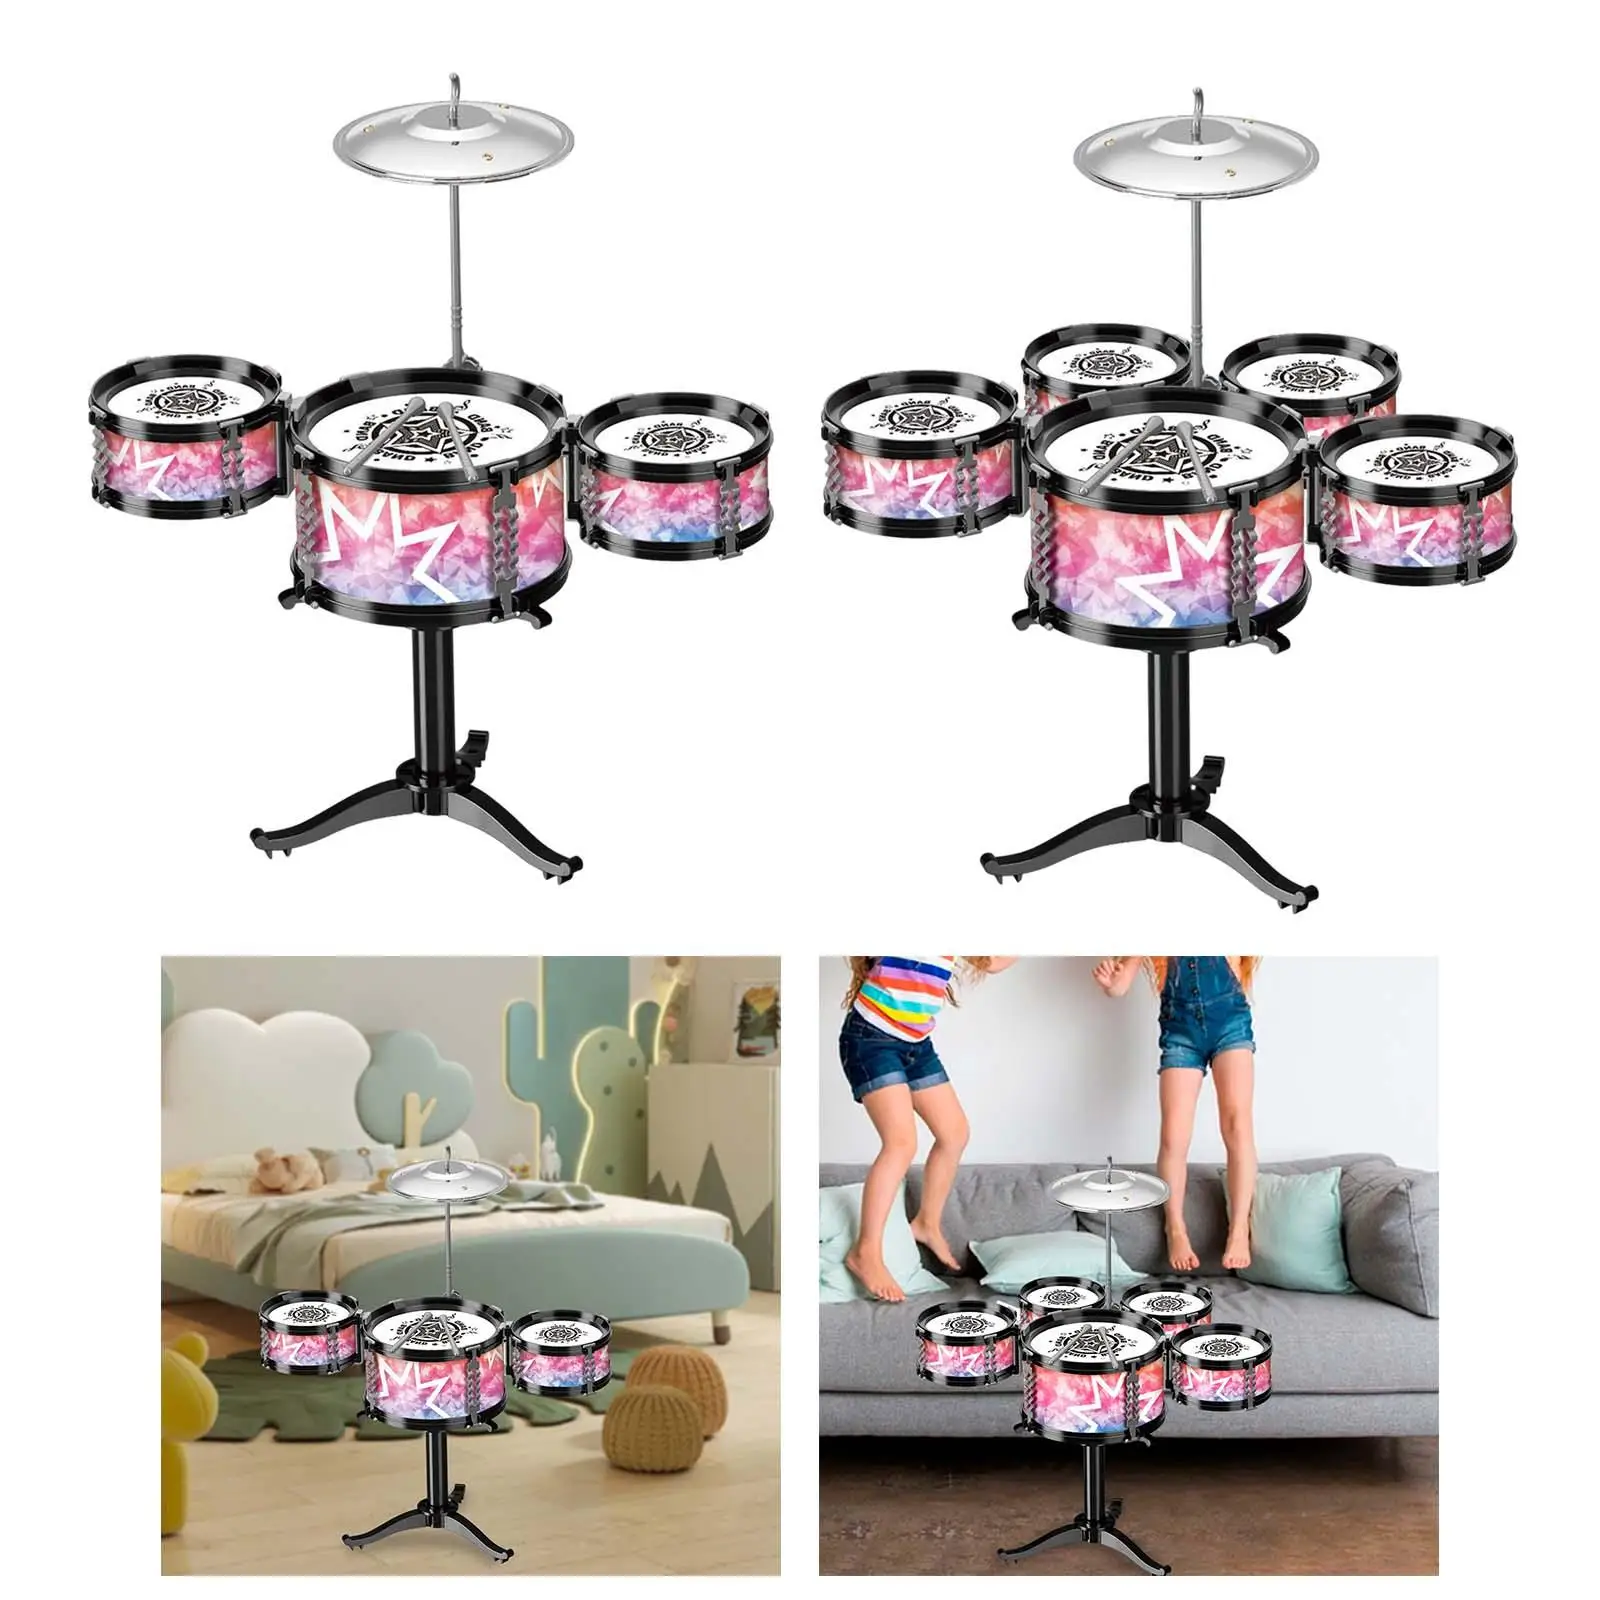 

Beginners Kids Drum Set Music Toy Playing Rhythm Beat Toy Musical Instrument Development Toy Sensory Toy for Concert Children